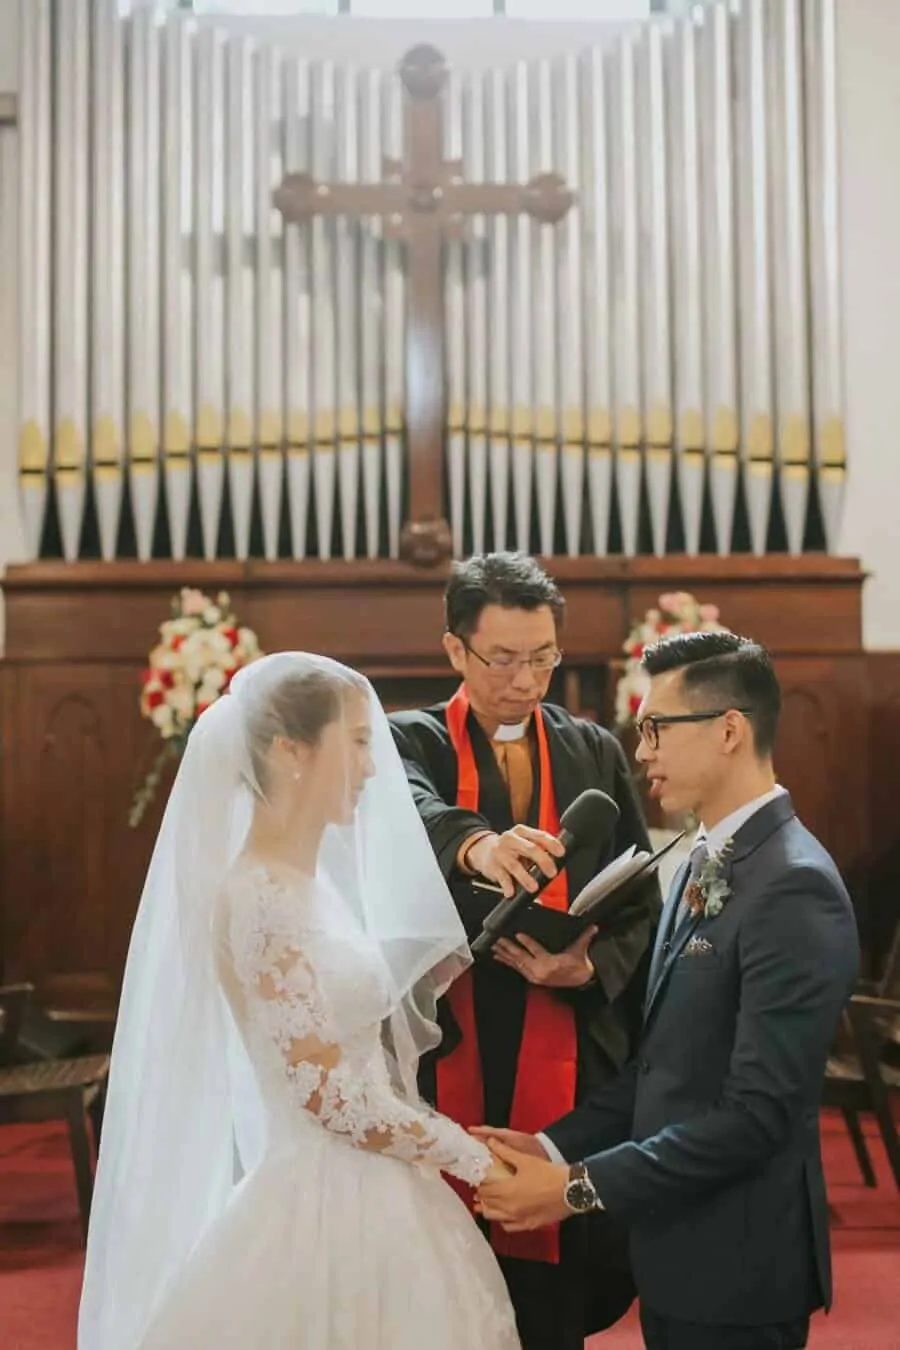 Wedding Photo at St. Andrew Church Kuala Lumpur by Cliff Choong Photography 